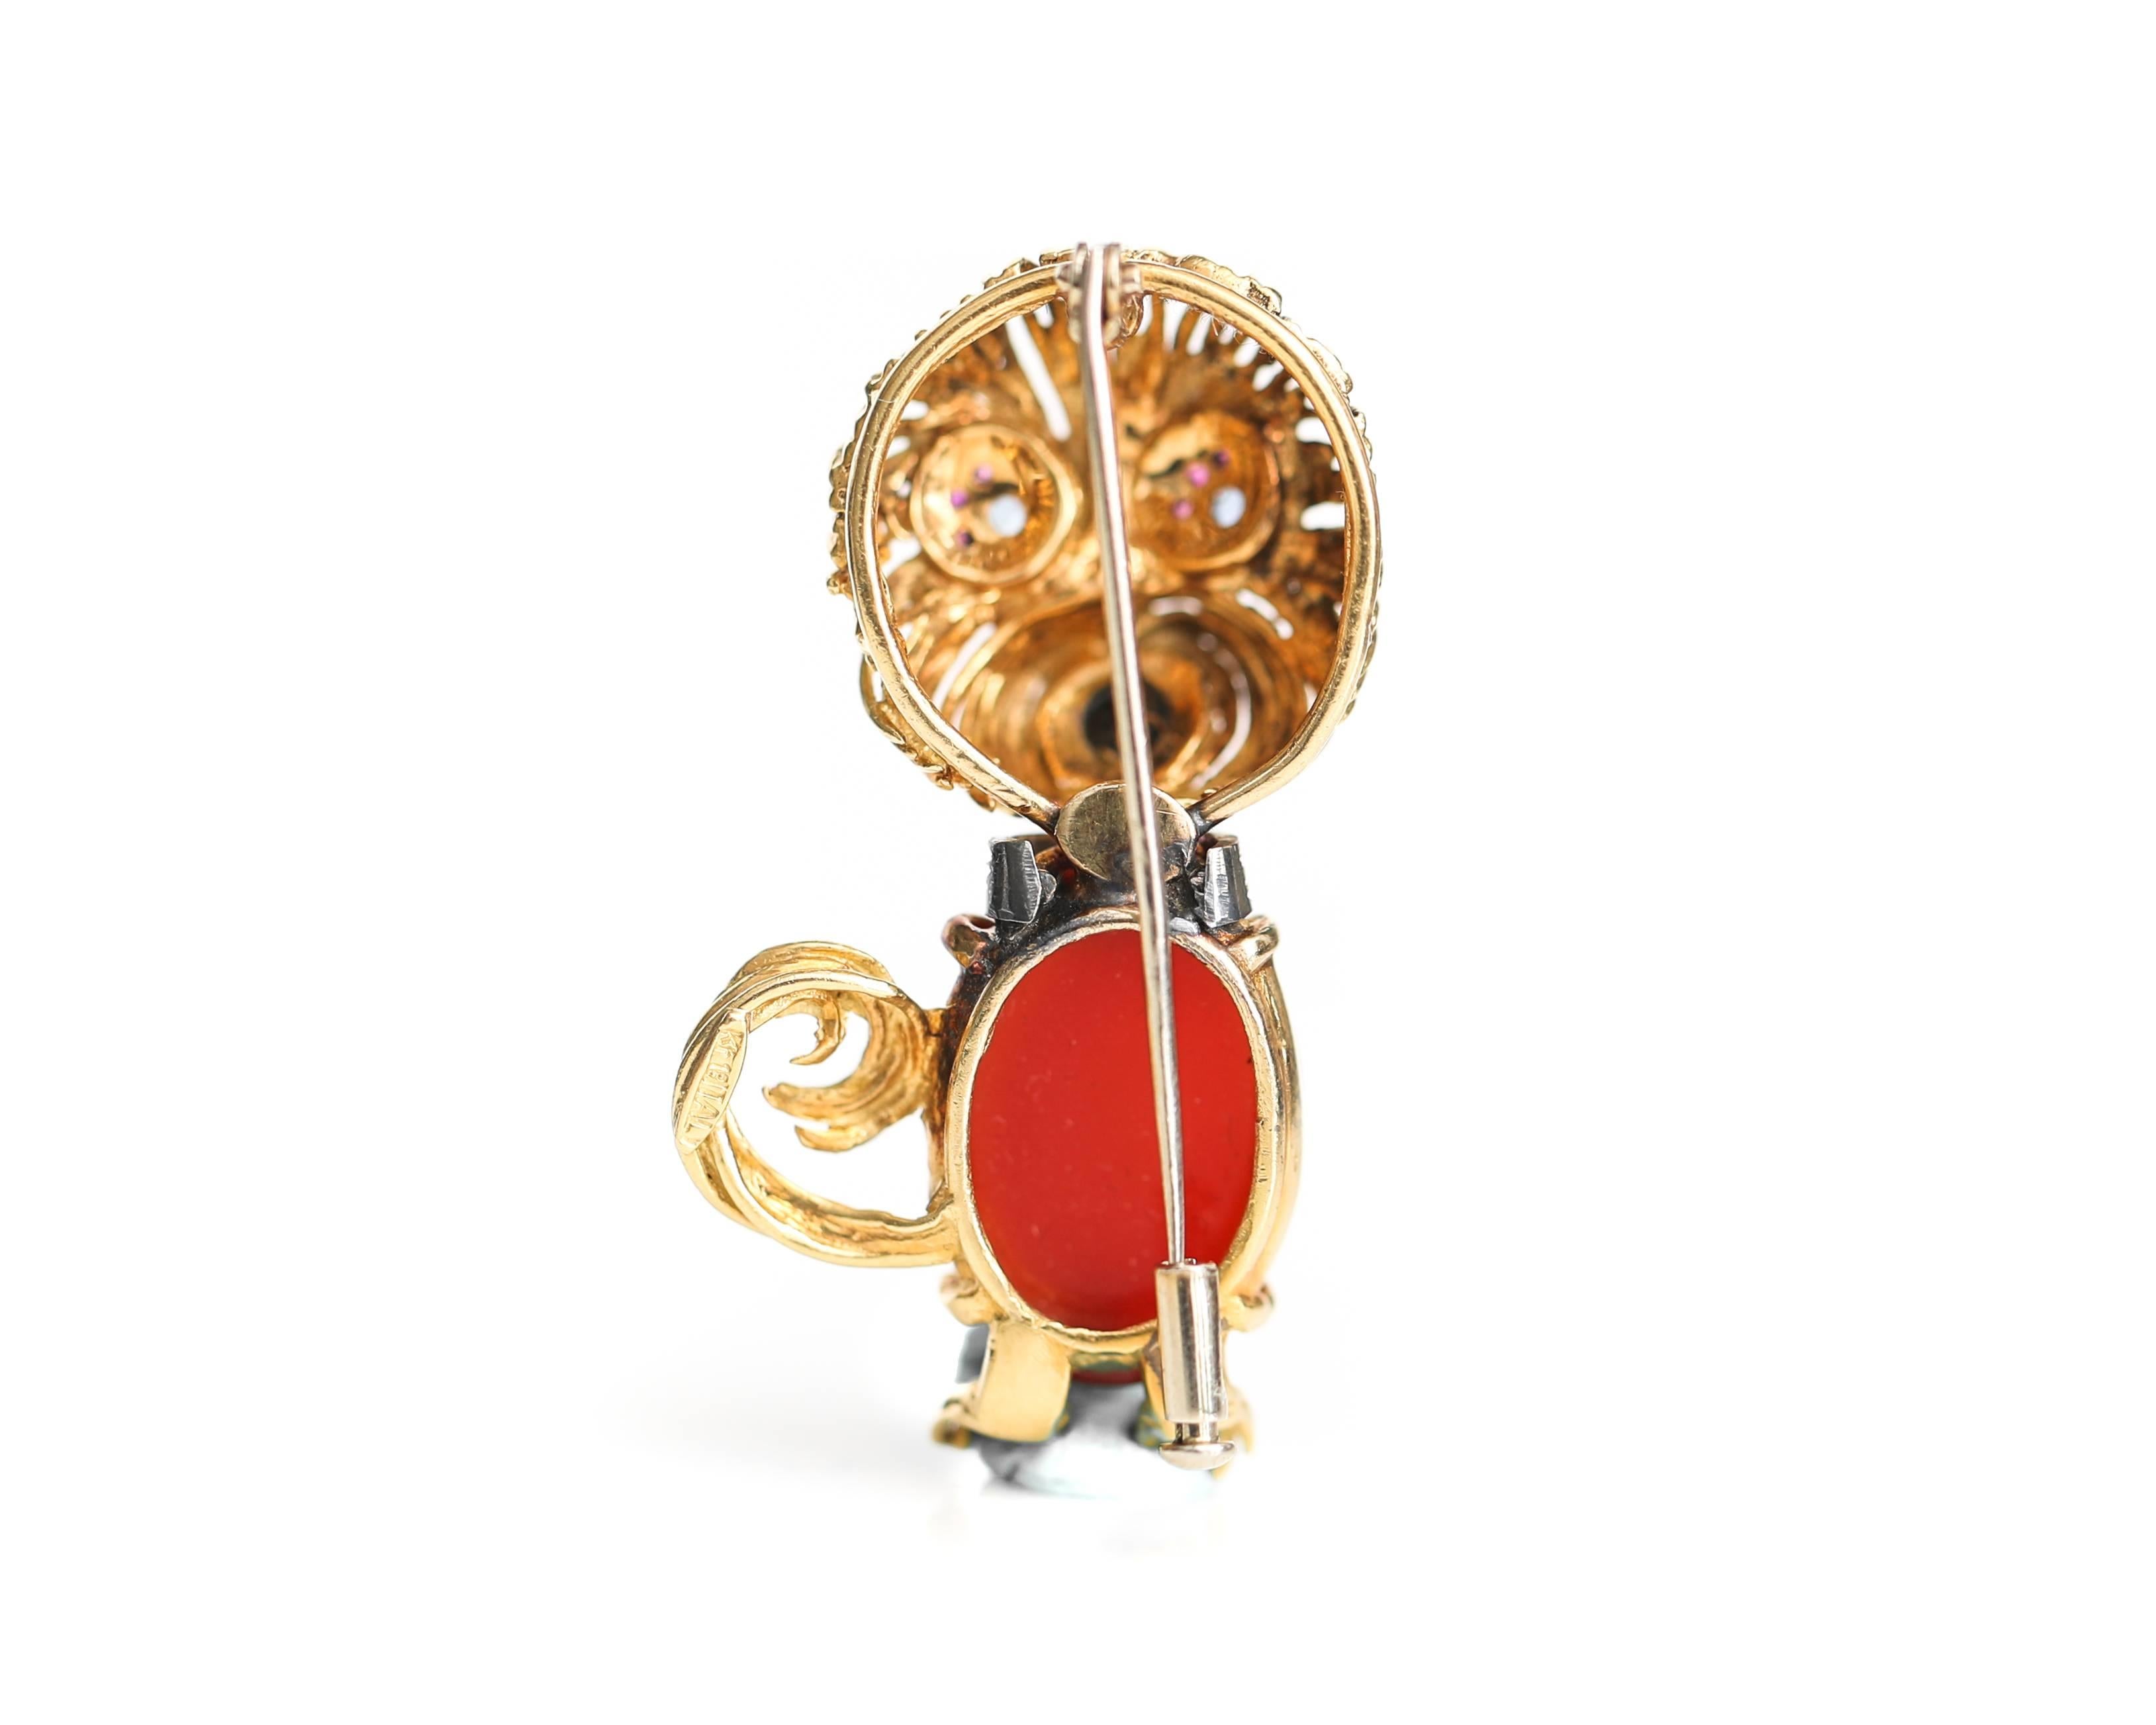 Carnelian, Onyx, Ruby, Sapphire, Diamond 18 Karat Yellow Gold Dog Brooch, Lapel Pin

Made in Italy, this Adorable Dog Brooch features a Carnelian Cabochon Body. The Head, Tail and Paws are crafted from 18 Karat Yellow Gold. 2 Blue Sapphire Eyes peek